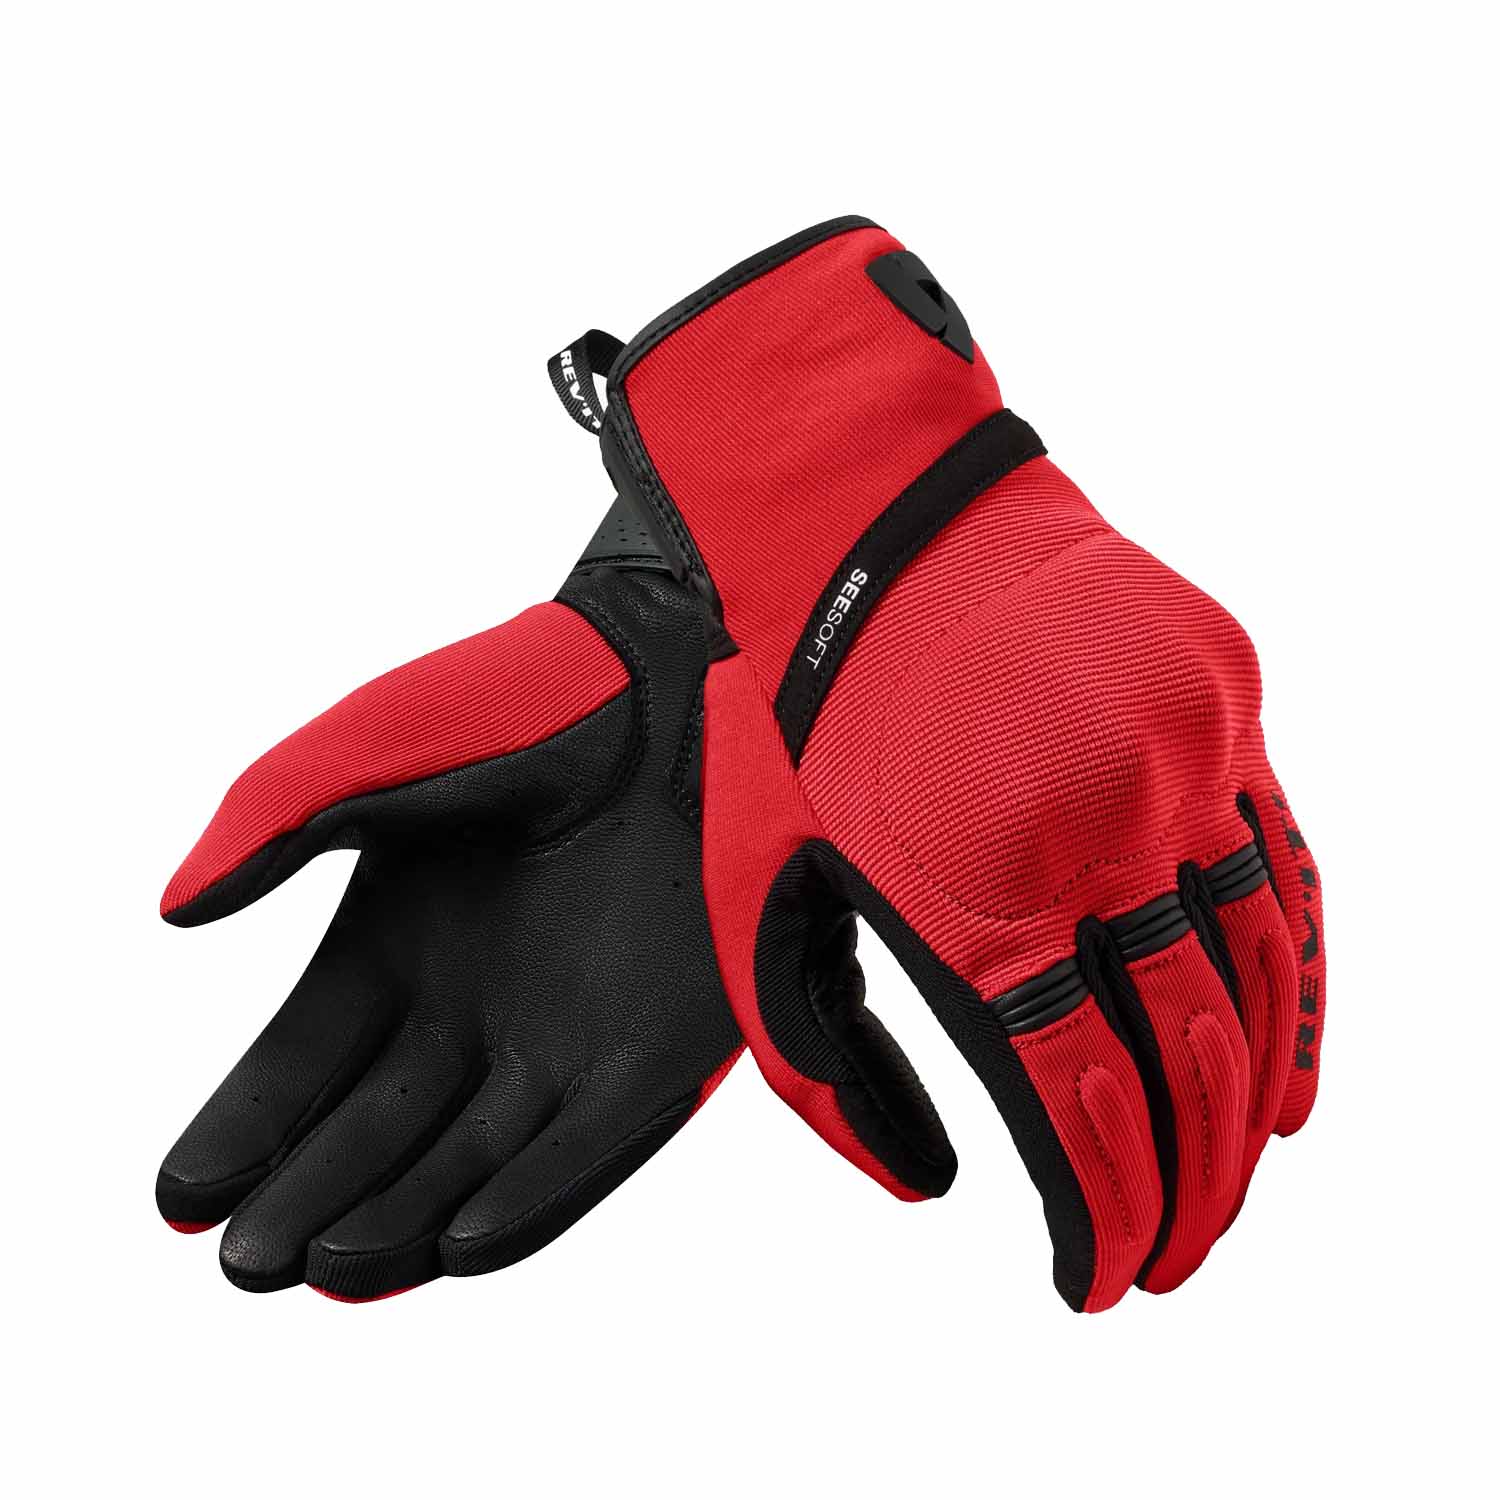 Image of EU REV'IT! Mosca 2 Gloves Red Black Taille M